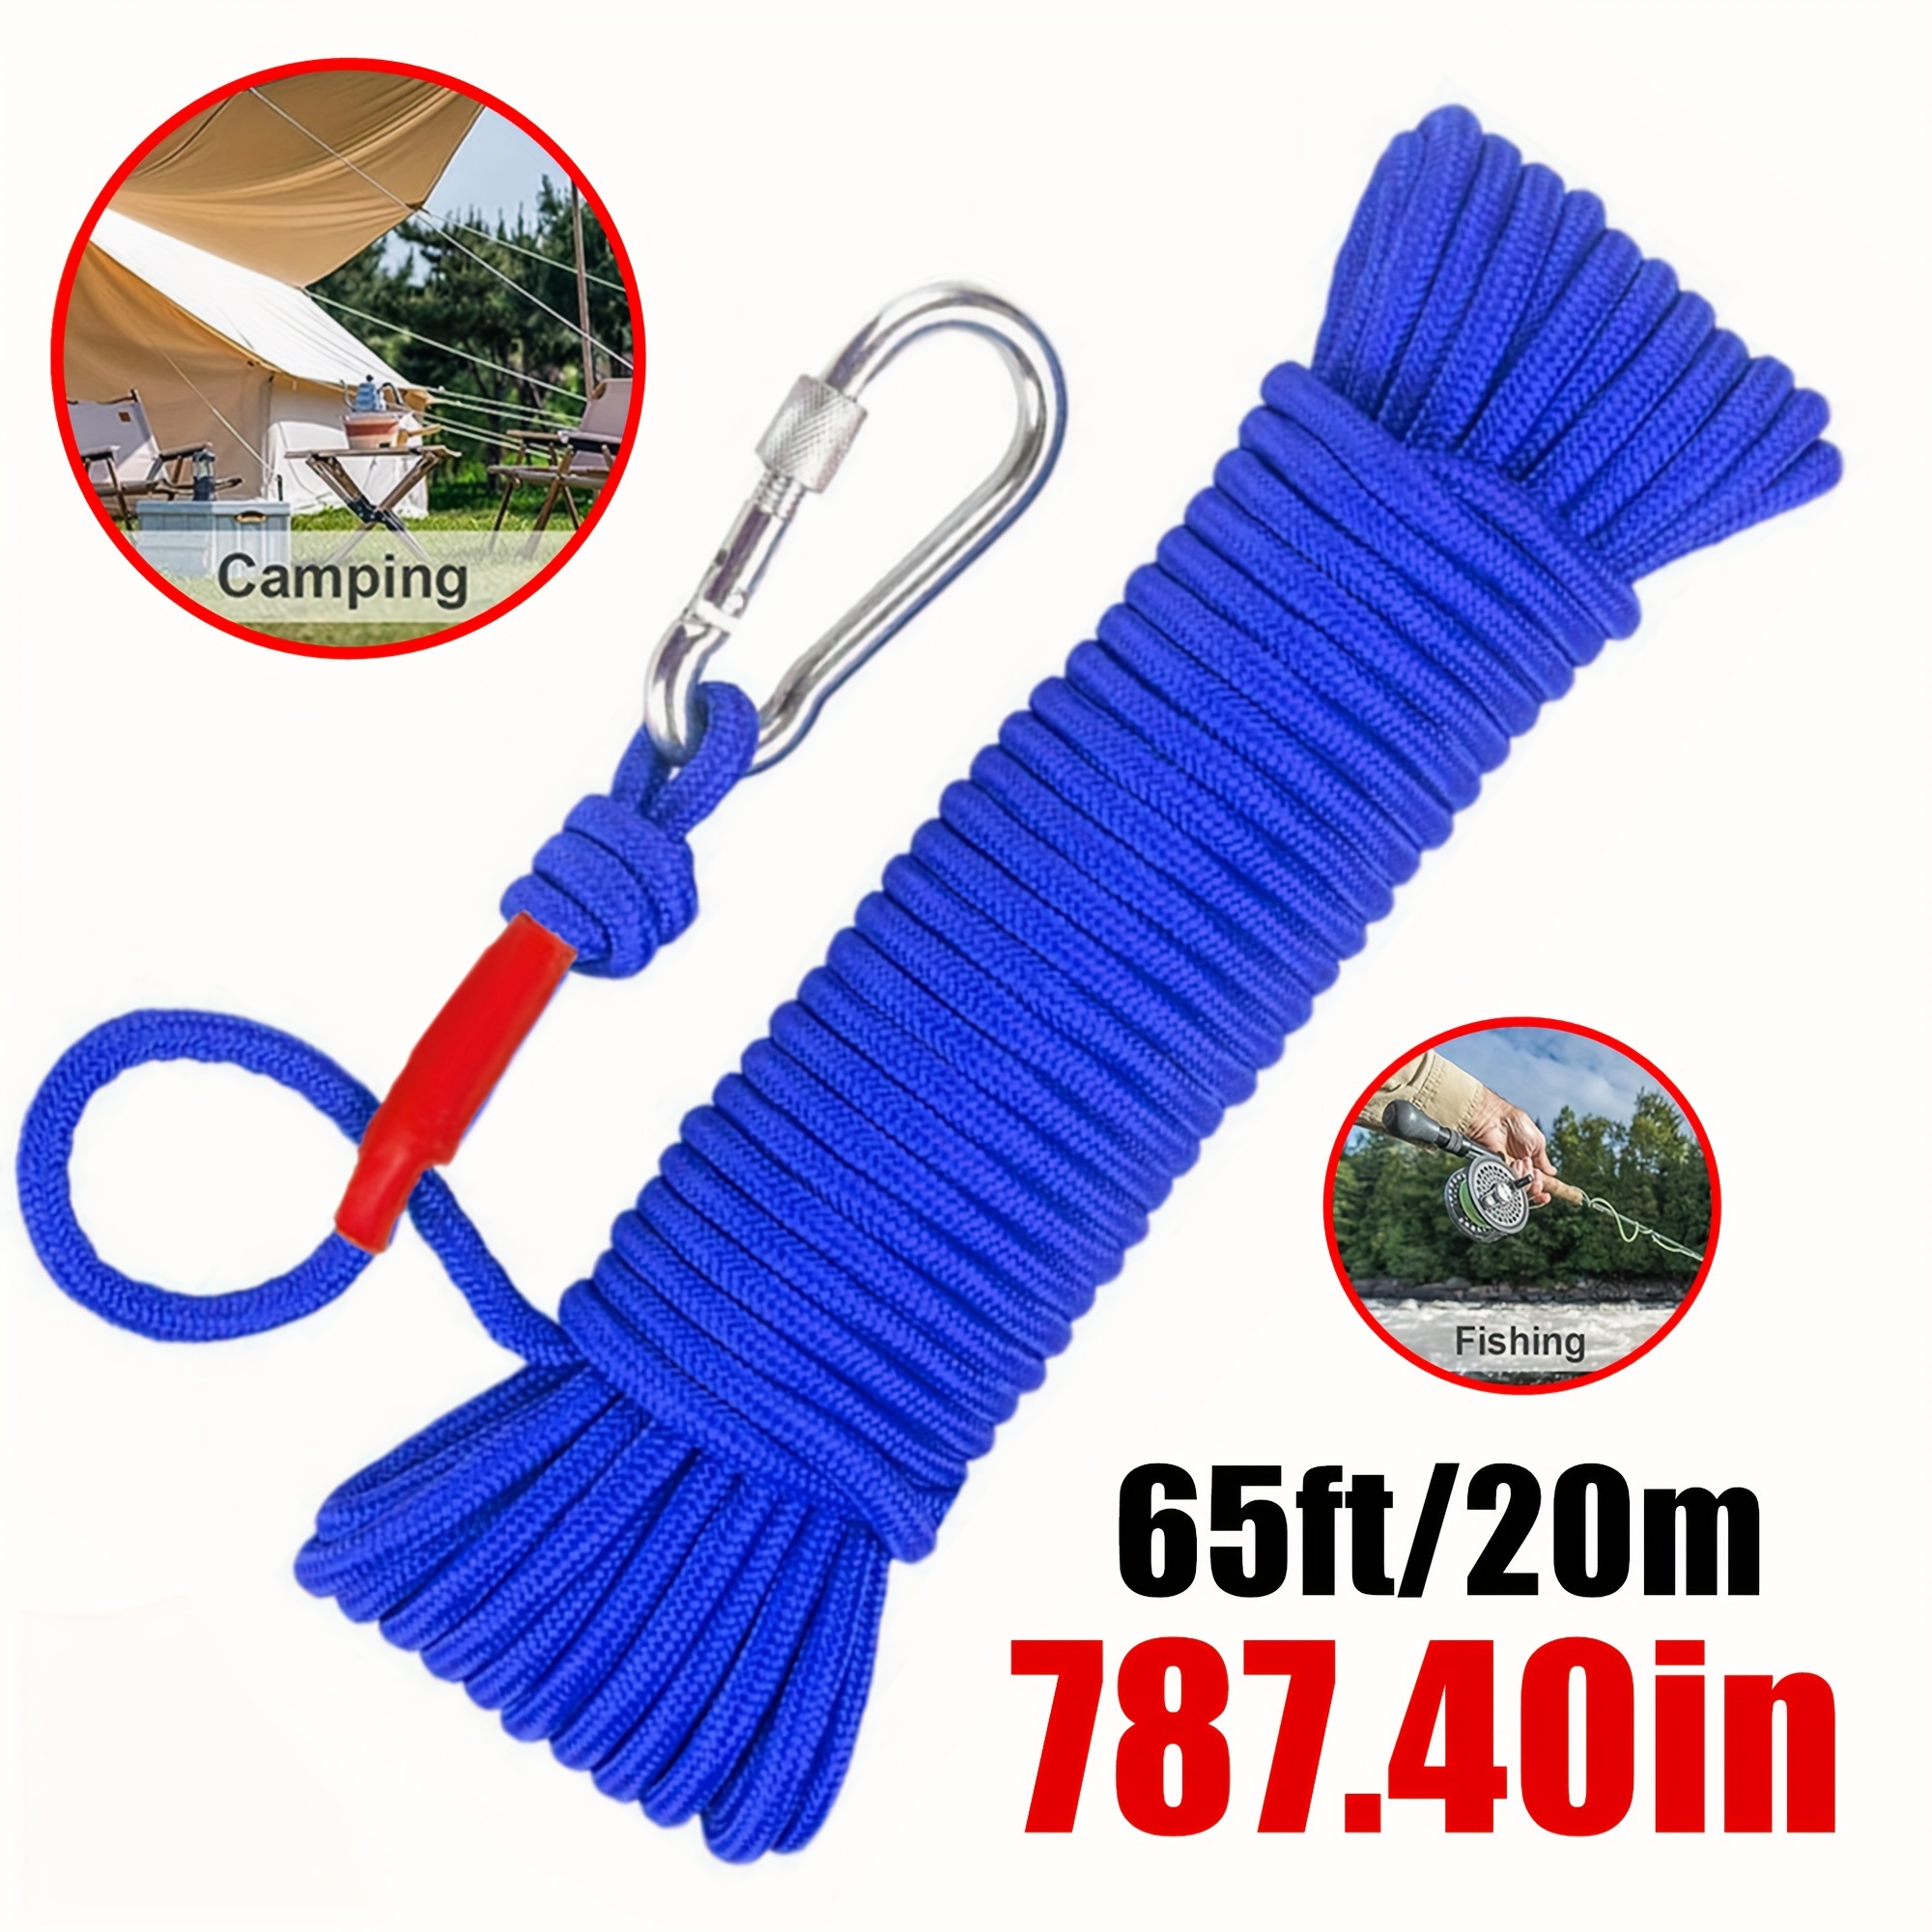 

1pc 787.40in Outdoor Boat Fixed Pull Rope, Dog Leash, Outdoor Tow Rope Clothesline, Anchor Rope, Fishing Rope With Carabiner